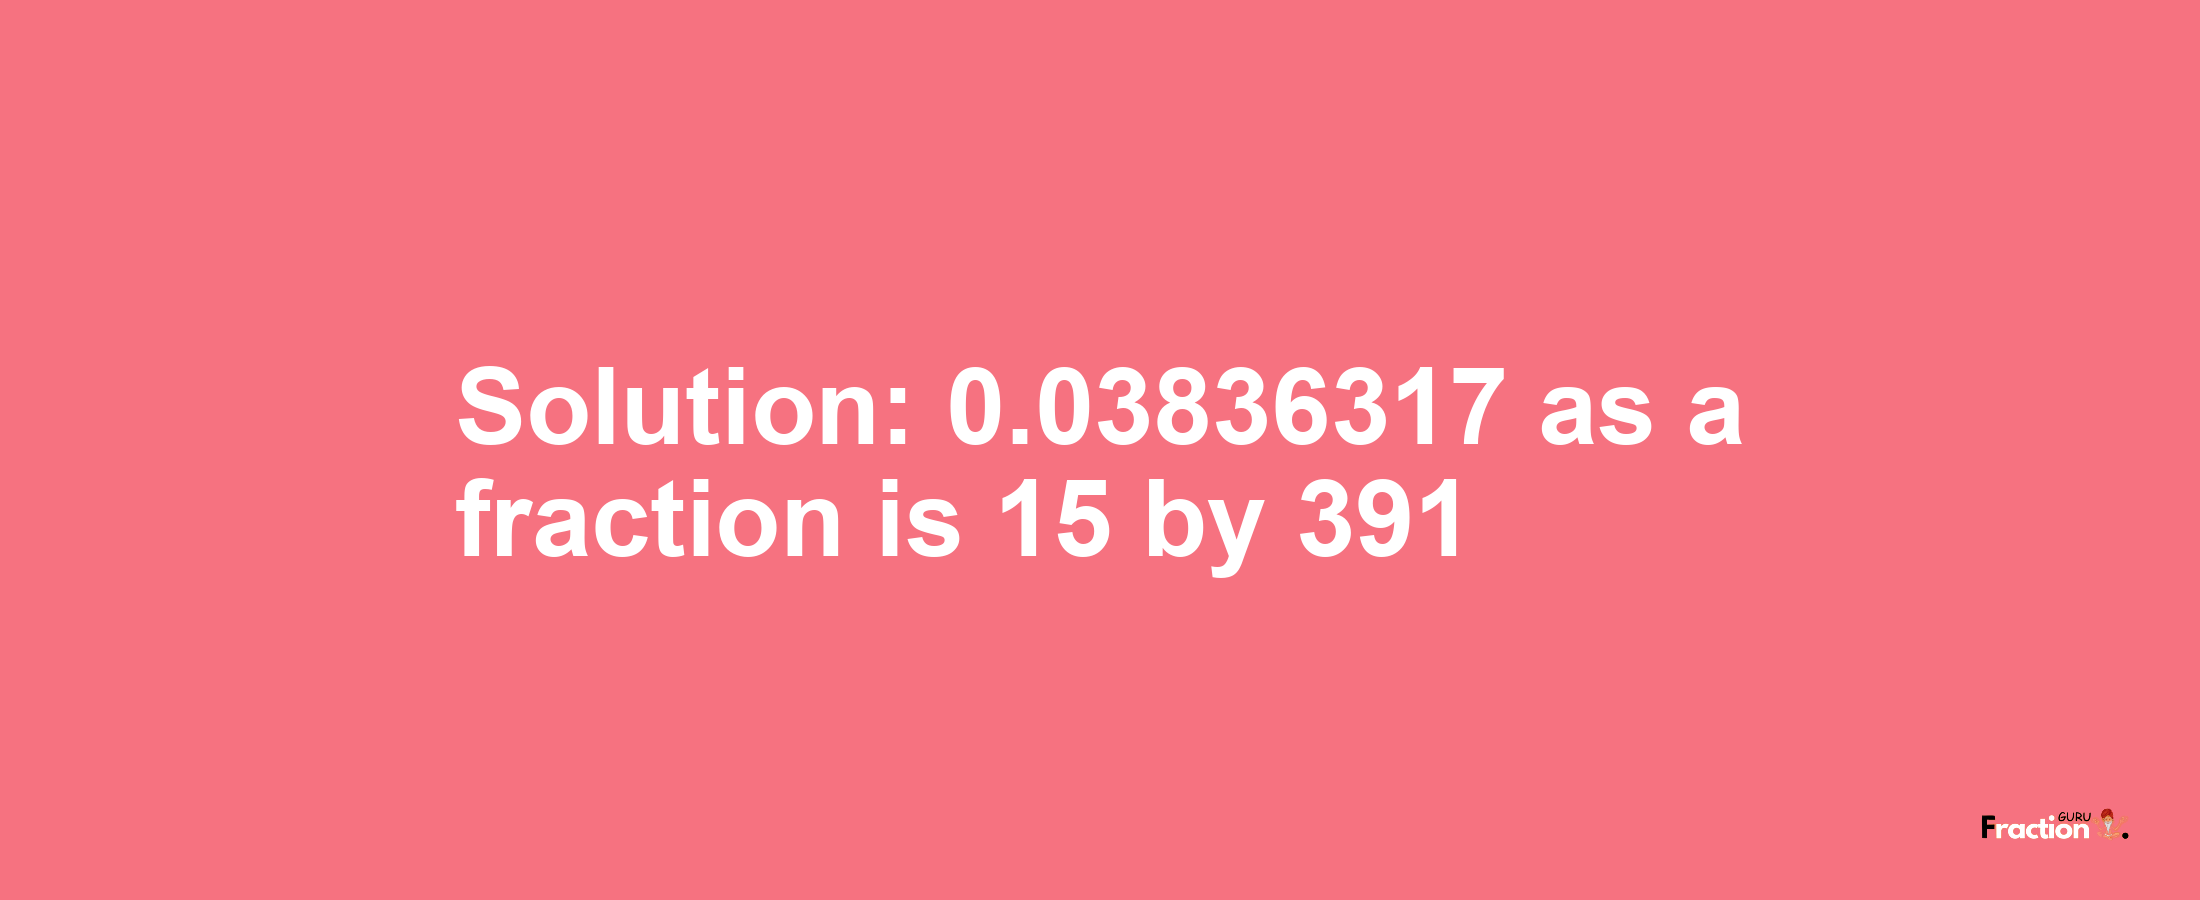 Solution:0.03836317 as a fraction is 15/391